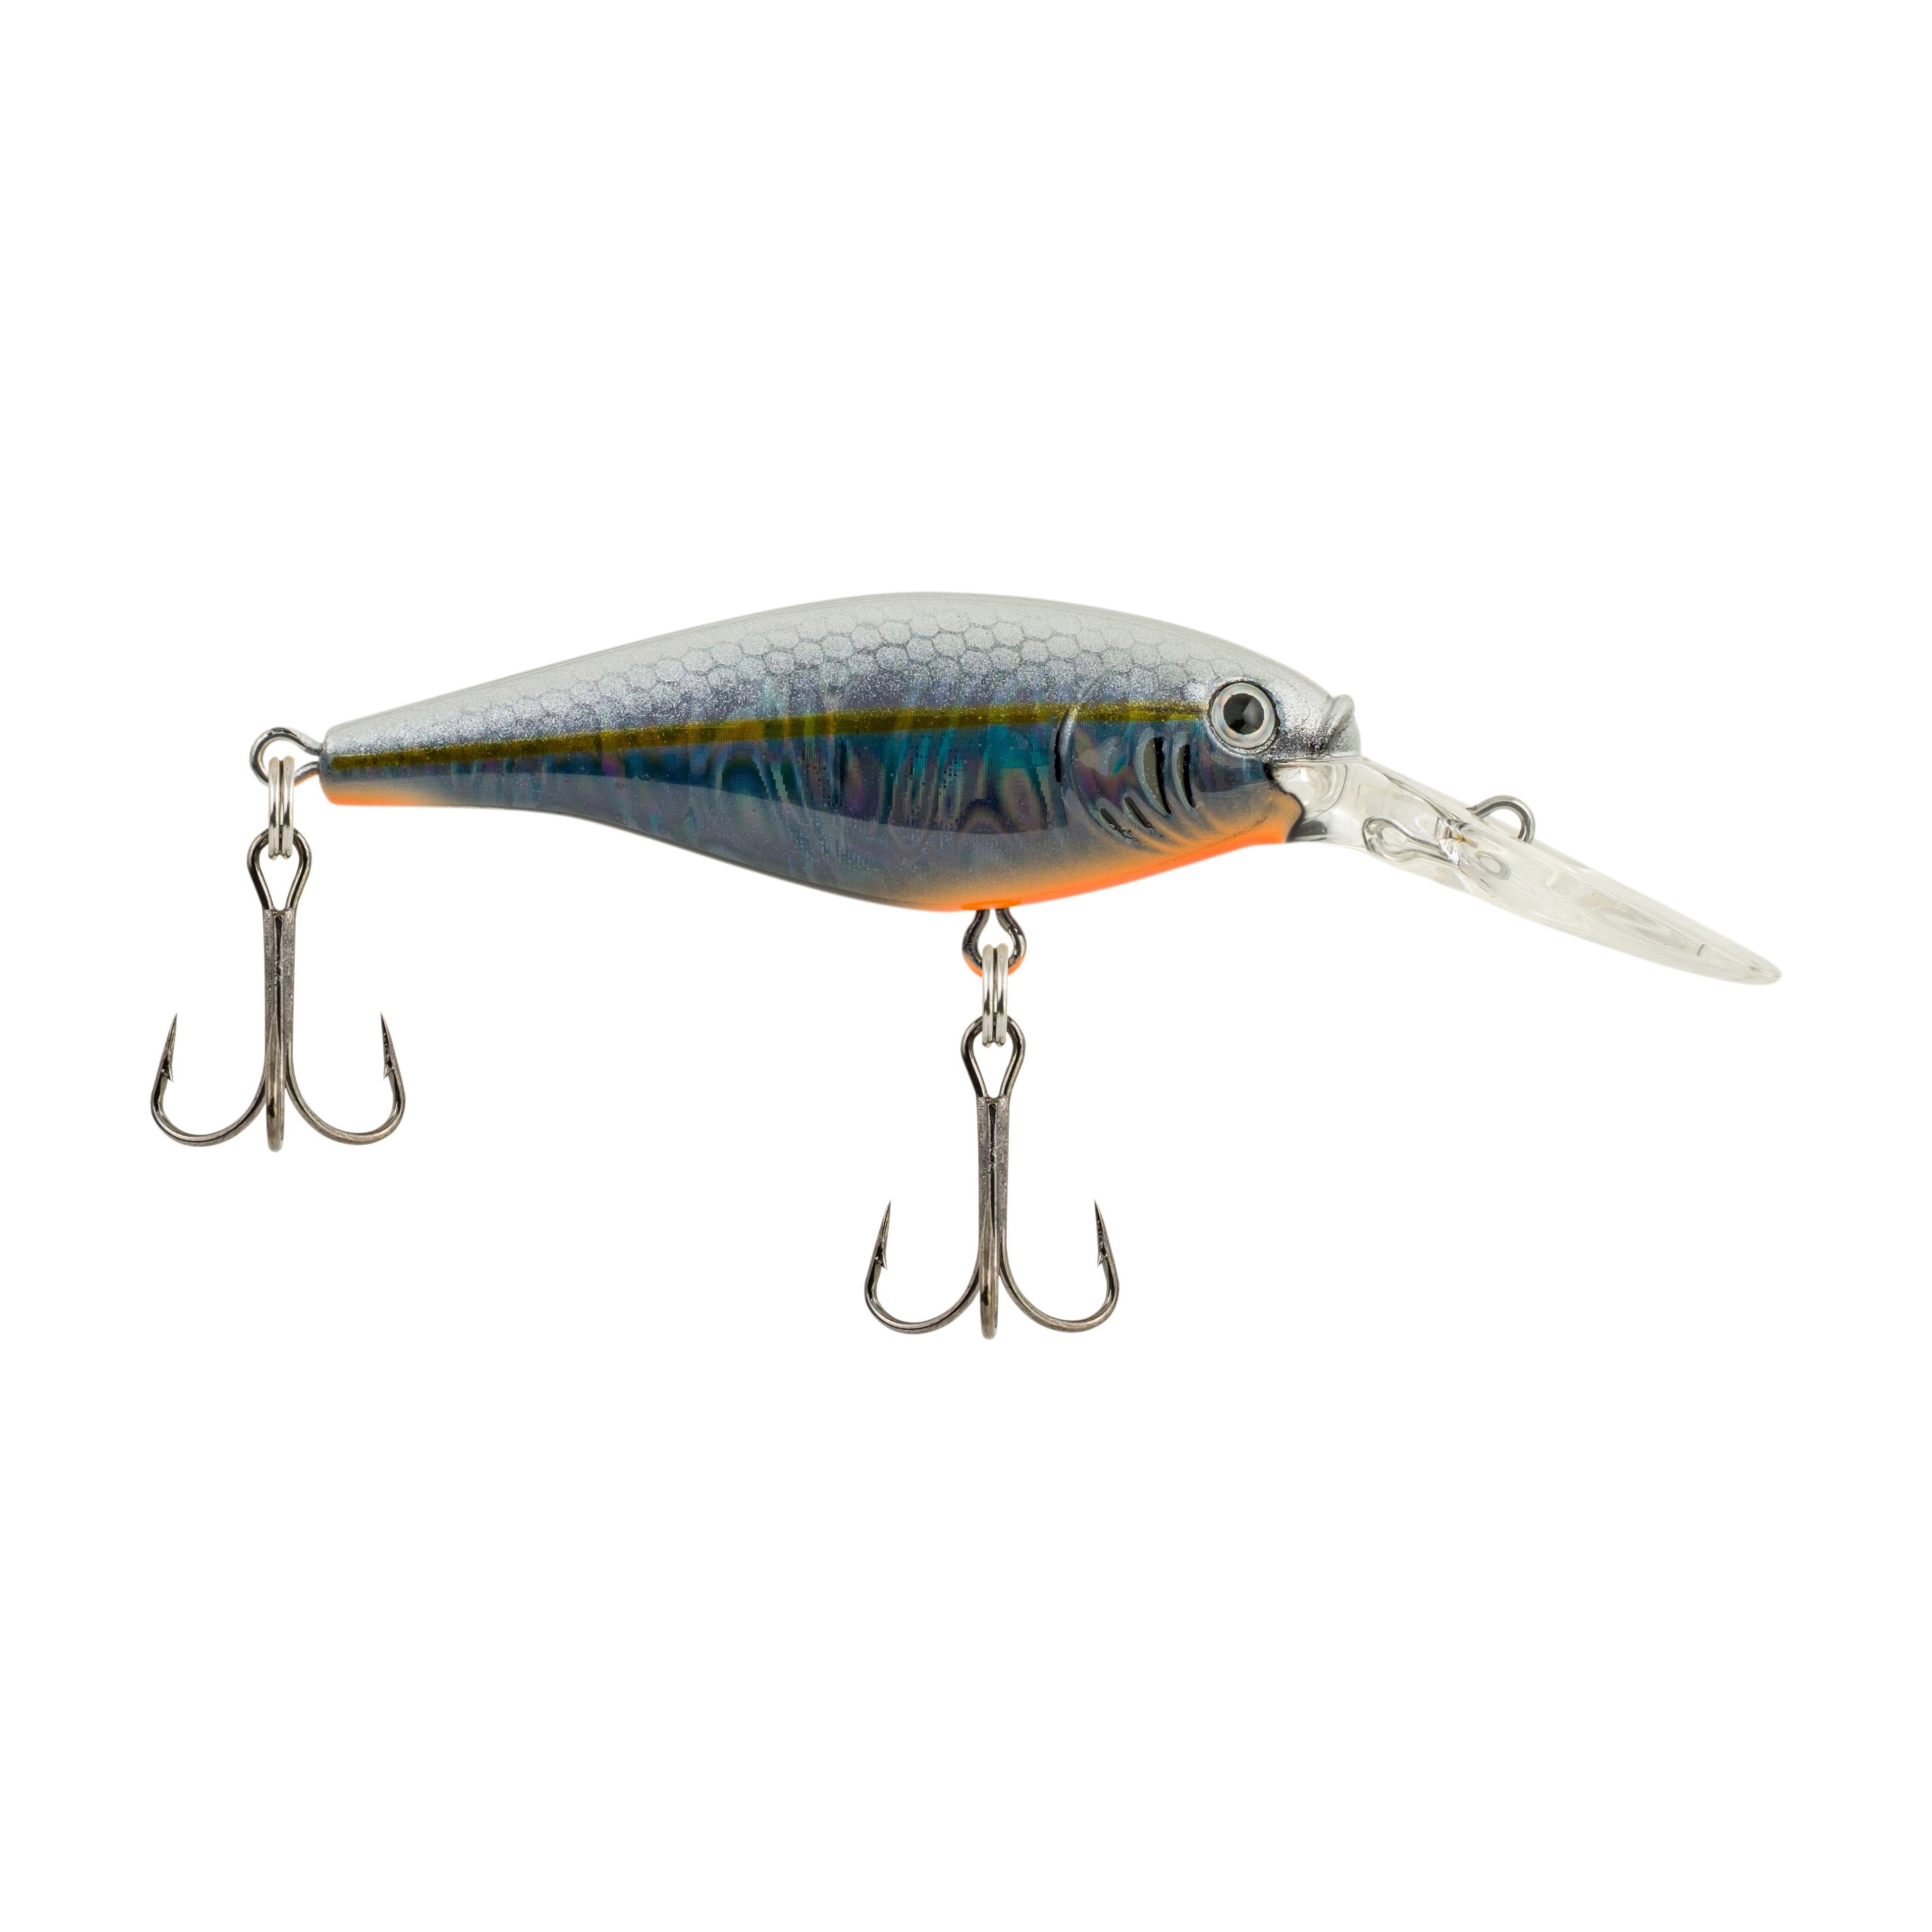 Mosquito and Flicker Shad, color sheet jointed flicker shad 